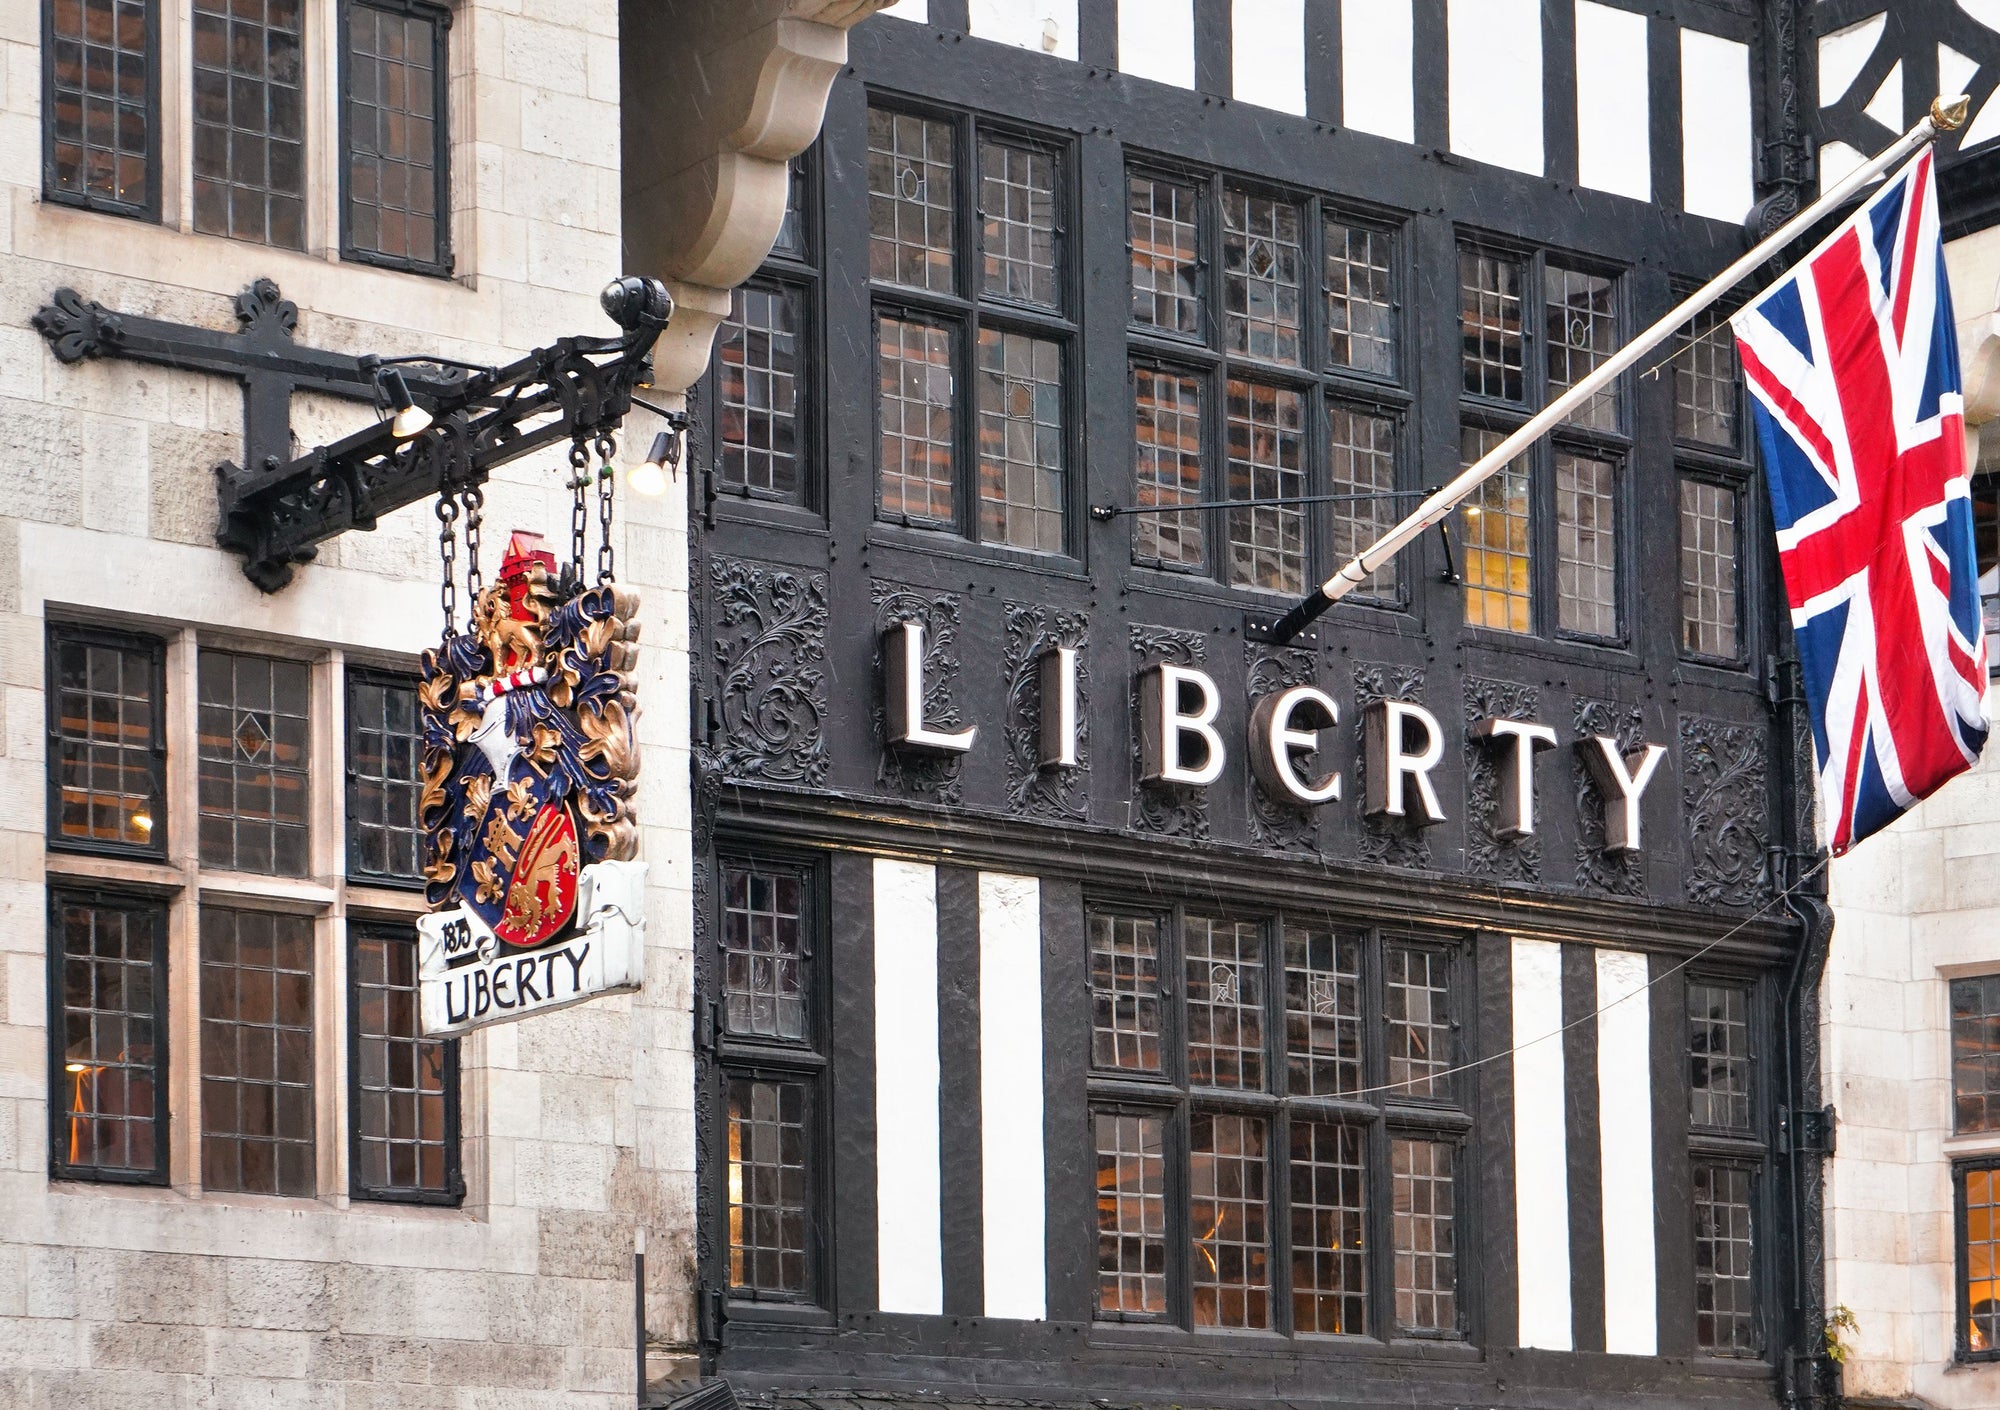 Liberty of London Shop Sign-Puffin Gear Liberty of London Cotton Print Kids Hats-Timeless style and quality-Made in Canada